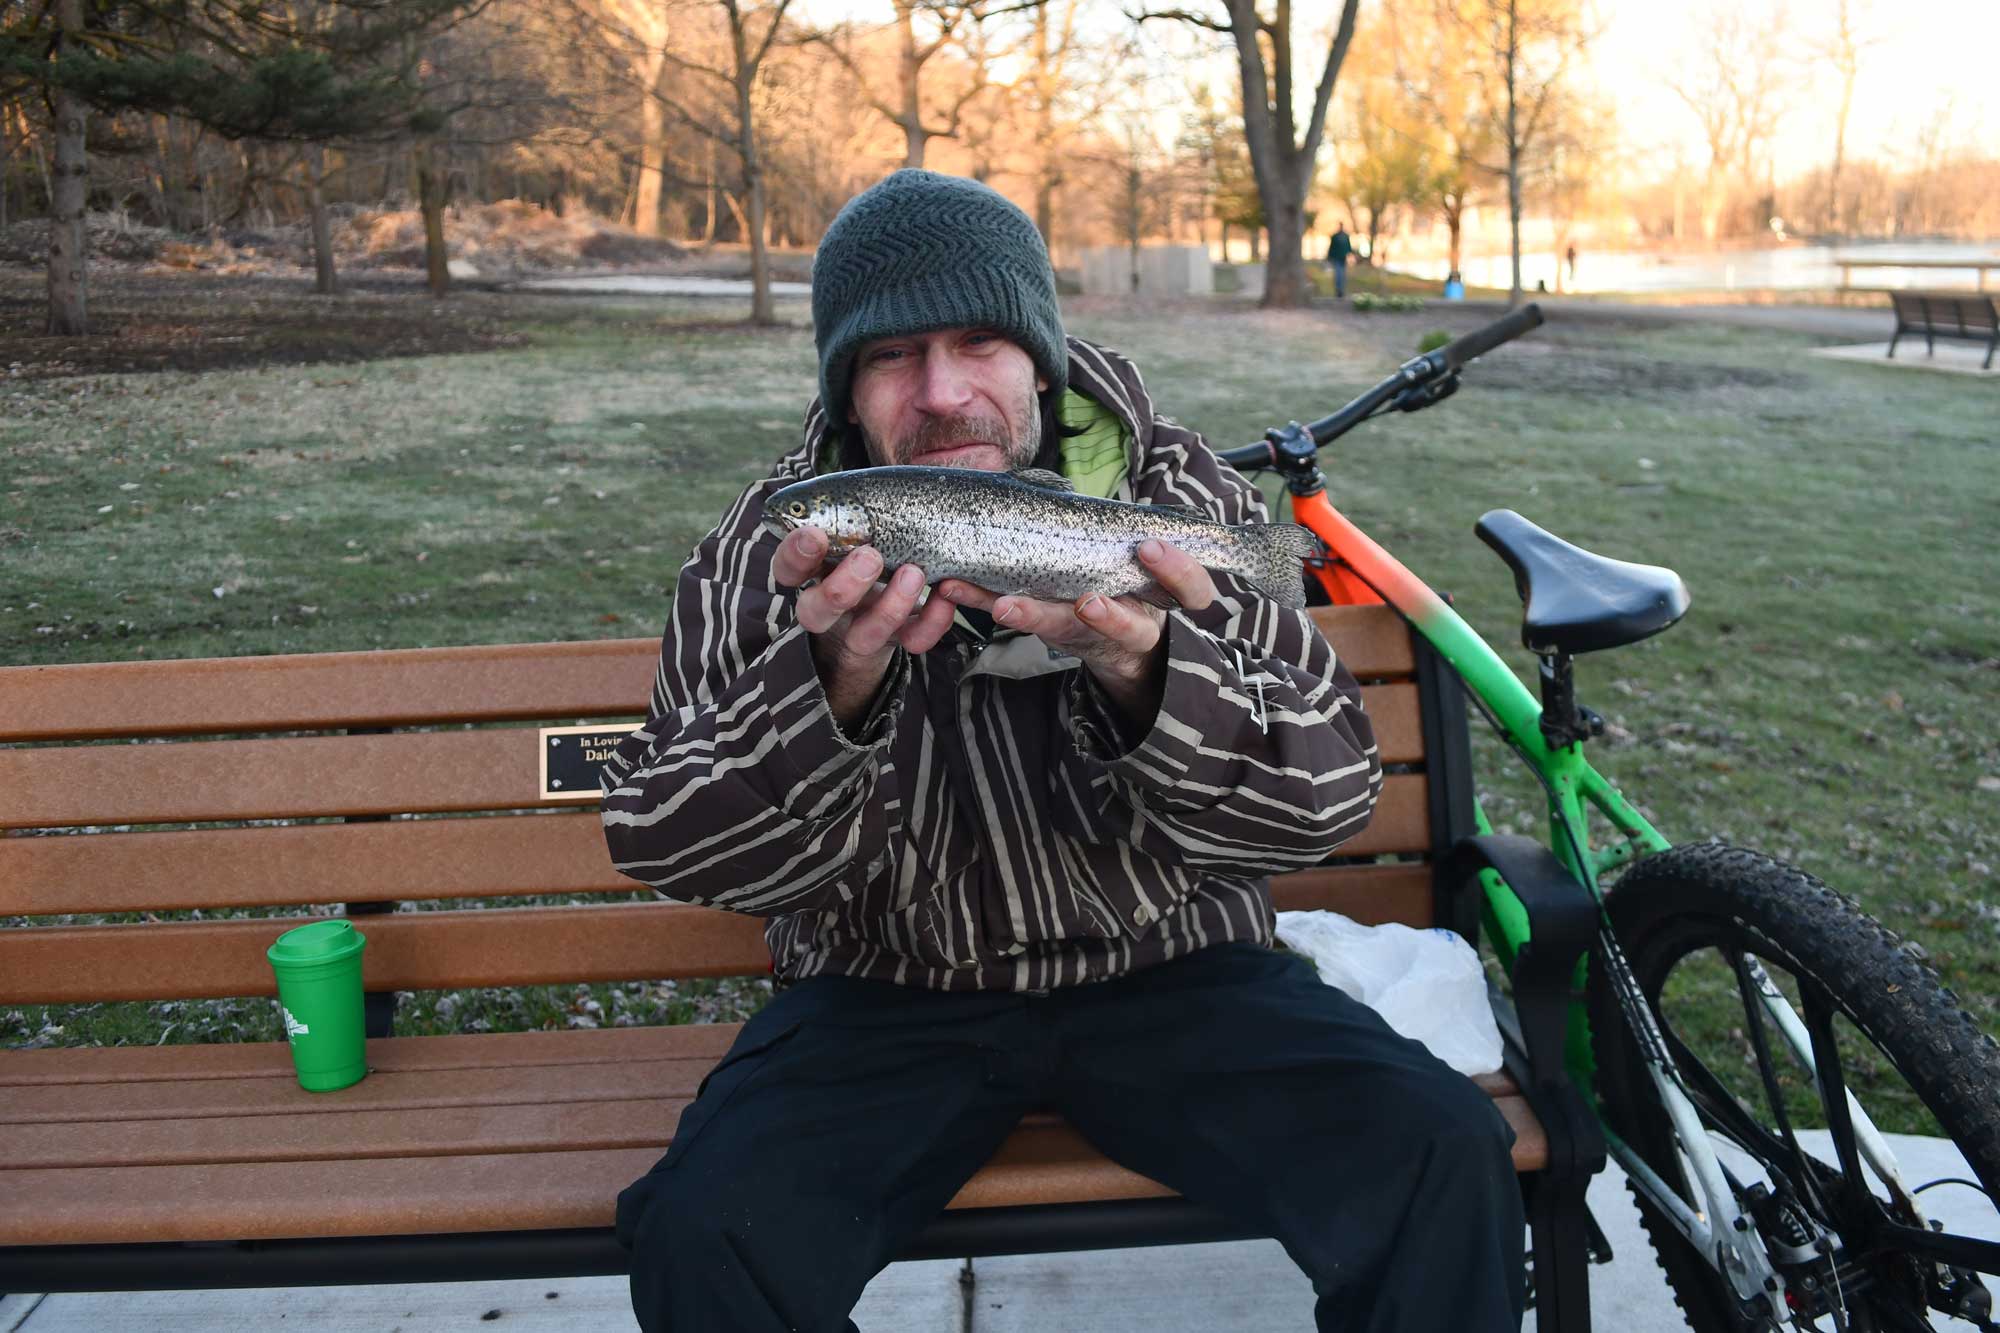 A man poses with a fish.